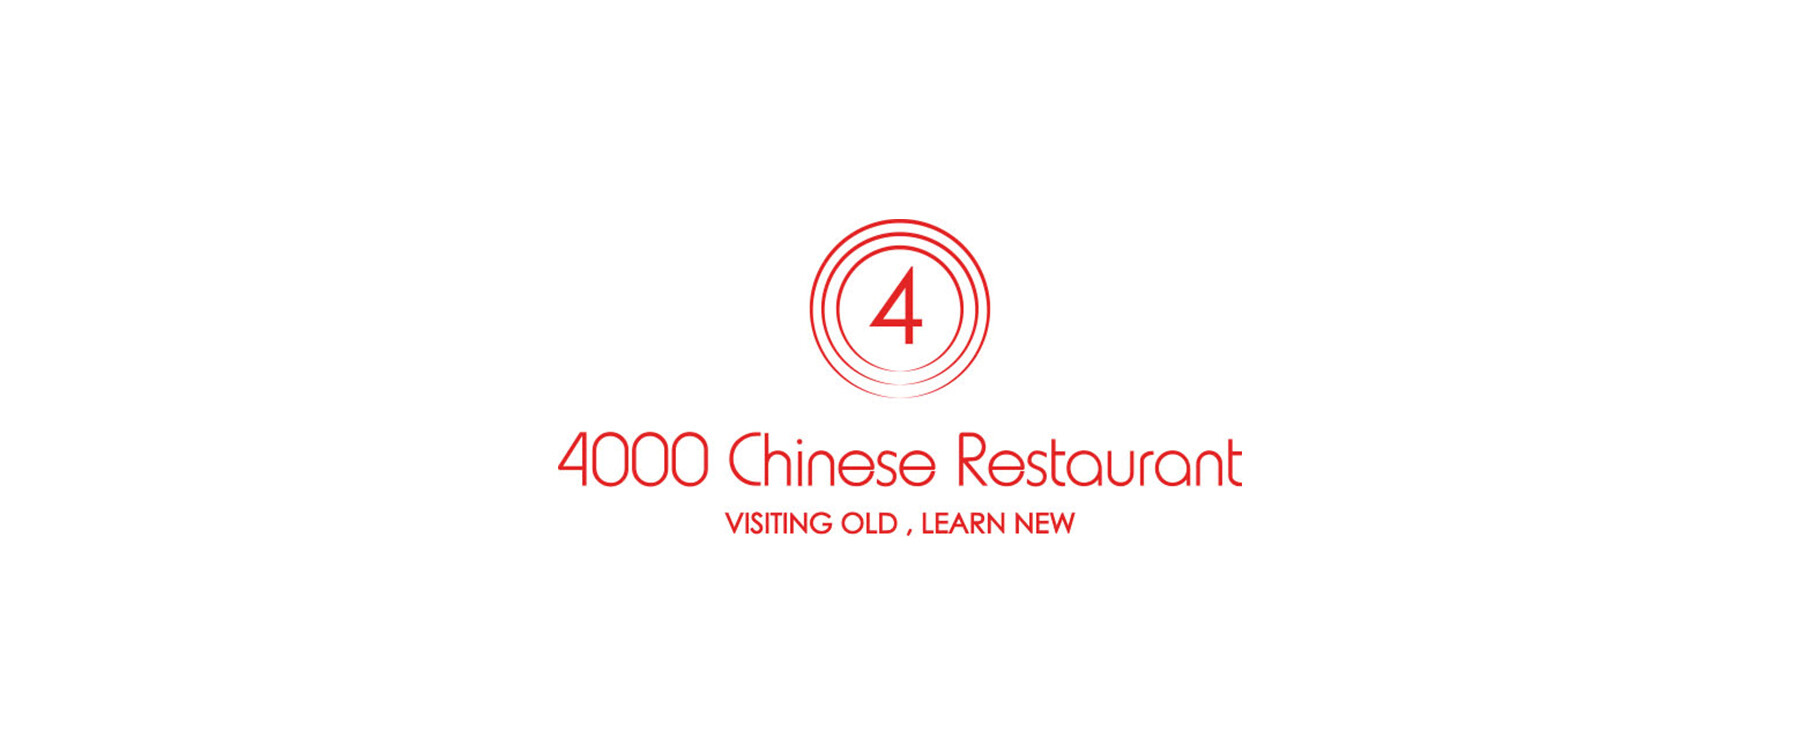 【Acceptance of applications closed】4000 Chinese restaurant event 2023 ～Autumn～[ A feast by ceramicist Jin Yamanaka and chef Kinya Komoda.] 's image